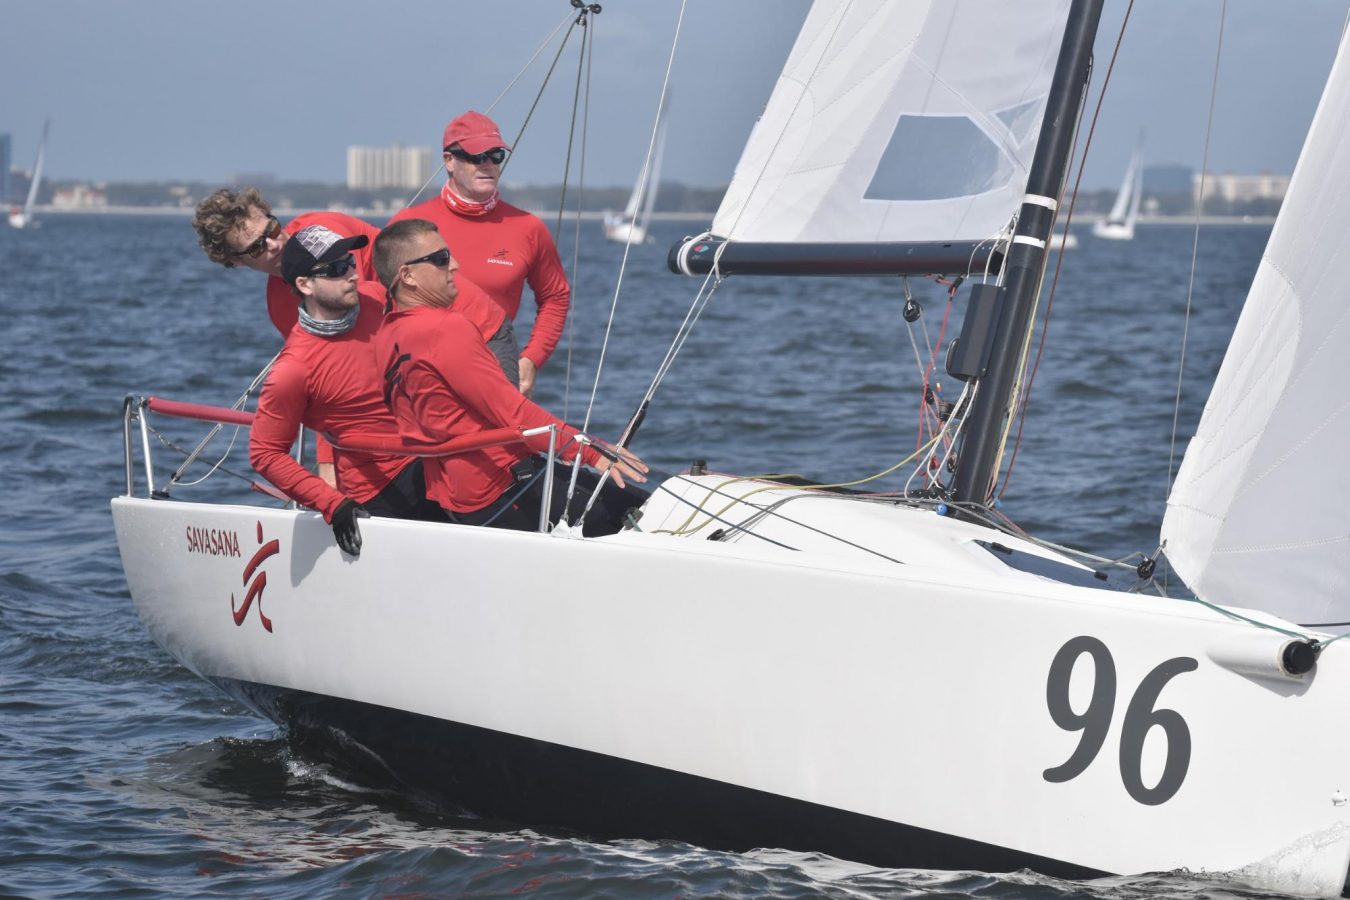 Interview with Brian Keane, J/70 US Winter Series Champion